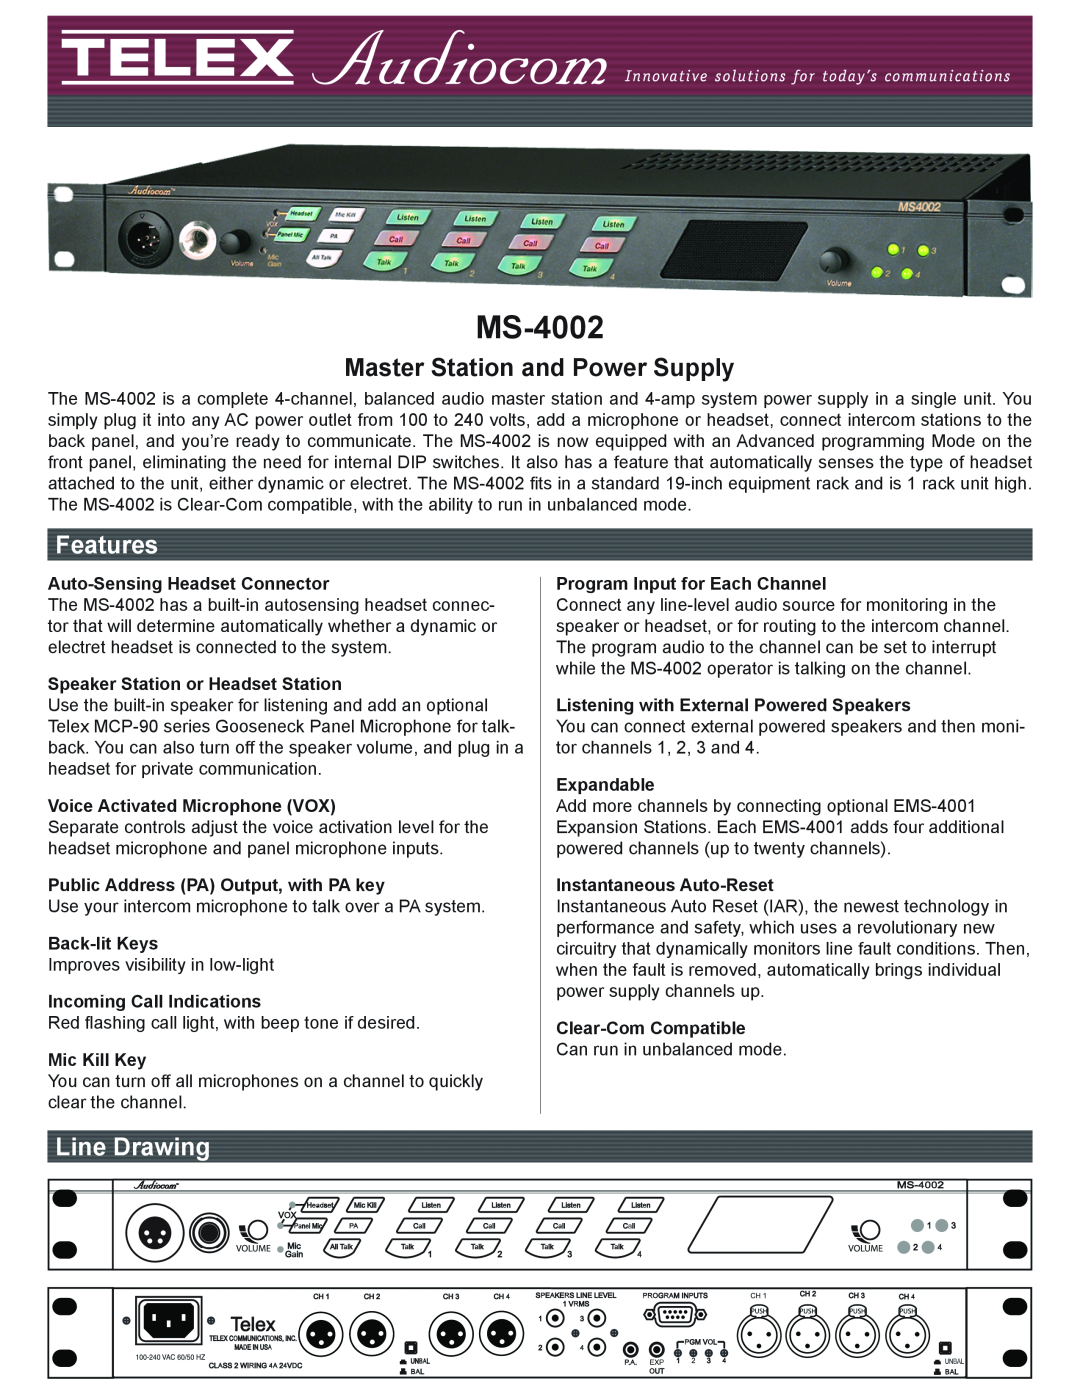 Telex MS-4002 manual Master Station and Power Supply, Features, Line Drawing 